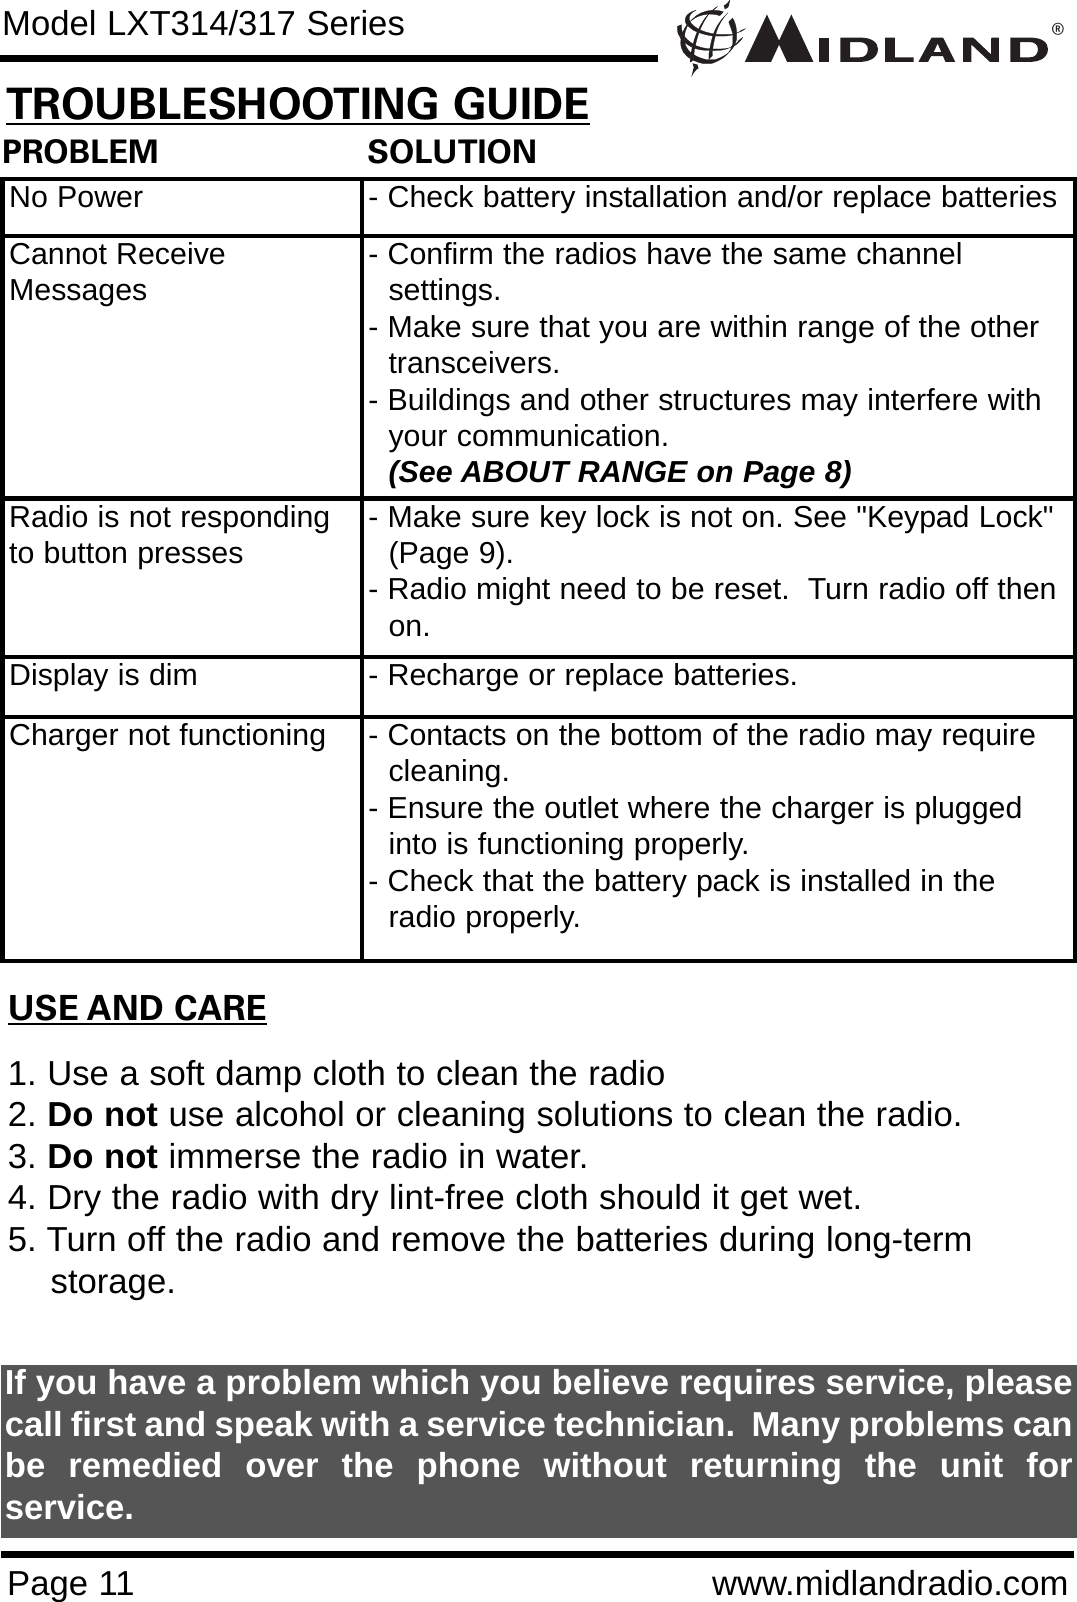 ®Page 11 www.midlandradio.comPROBLEM                     SOLUTIONNo Power - Check battery installation and/or replace batteriesCannot ReceiveMessages - Confirm the radios have the same channel      settings.- Make sure that you are within range of the other transceivers.- Buildings and other structures may interfere with your communication. (See ABOUT RANGE on Page 8)Radio is not respondingto button presses - Make sure key lock is not on. See &quot;Keypad Lock&quot; (Page 9).- Radio might need to be reset.  Turn radio off then on.Display is dim - Recharge or replace batteries.Charger not functioning - Contacts on the bottom of the radio may require cleaning. - Ensure the outlet where the charger is plugged into is functioning properly.- Check that the battery pack is installed in the radio properly.USE AND CARE1. Use a soft damp cloth to clean the radio2. Do not use alcohol or cleaning solutions to clean the radio.3. Do not immerse the radio in water.4. Dry the radio with dry lint-free cloth should it get wet.5. Turn off the radio and remove the batteries during long-term    storage.If you have a problem which you believe requires service, pleasecall first and speak with a service technician.  Many problems canbe remedied over the phone without returning the unit forservice.Model LXT314/317 SeriesTROUBLESHOOTING GUIDE